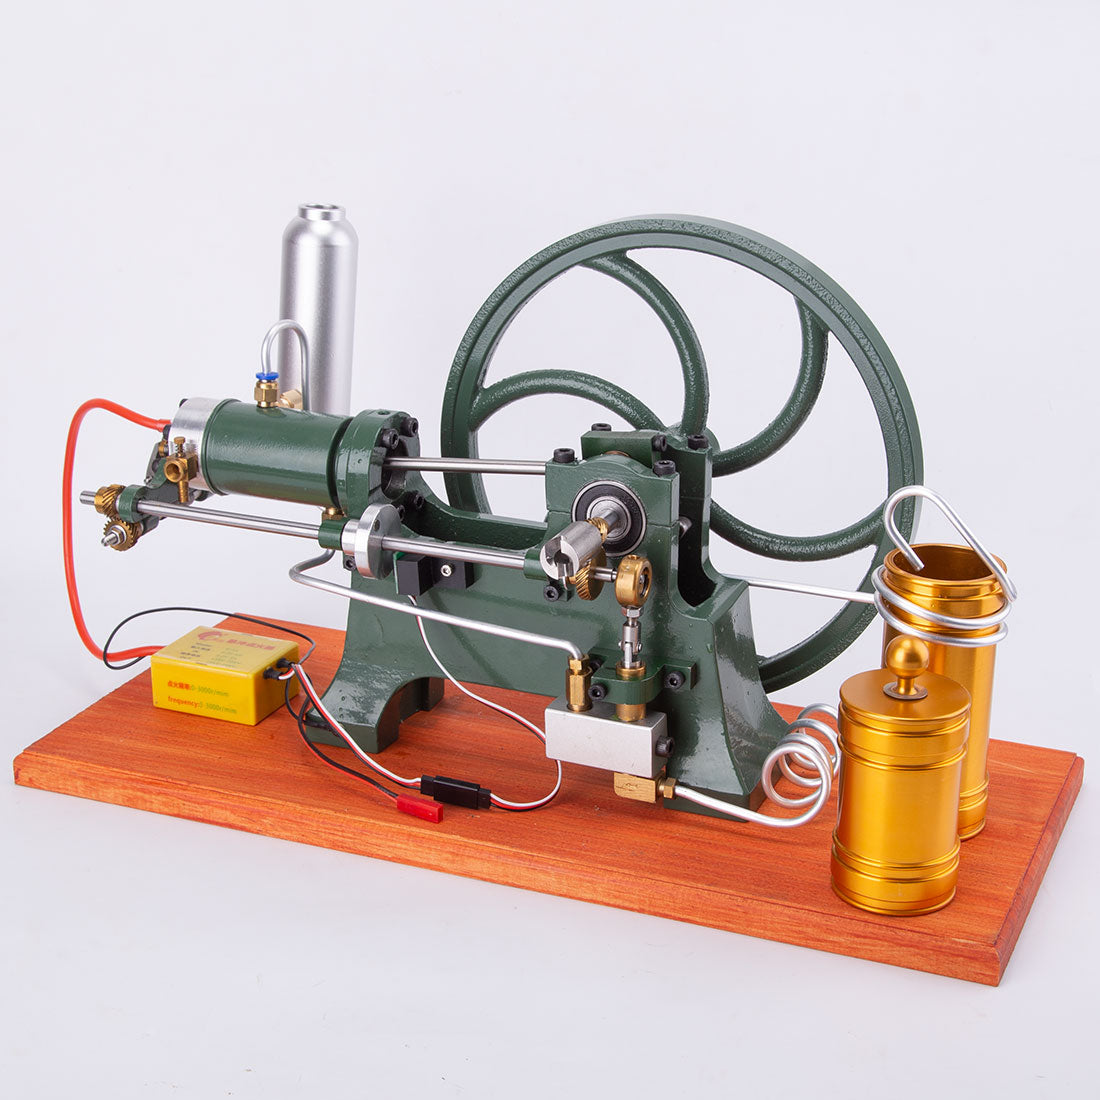 RETROL Antique 4-Stroke Hot-bulb Engine Simulation Horizontal Water-cooled Gasoline Tractor Engine Internal Combustion Engine Model Collection